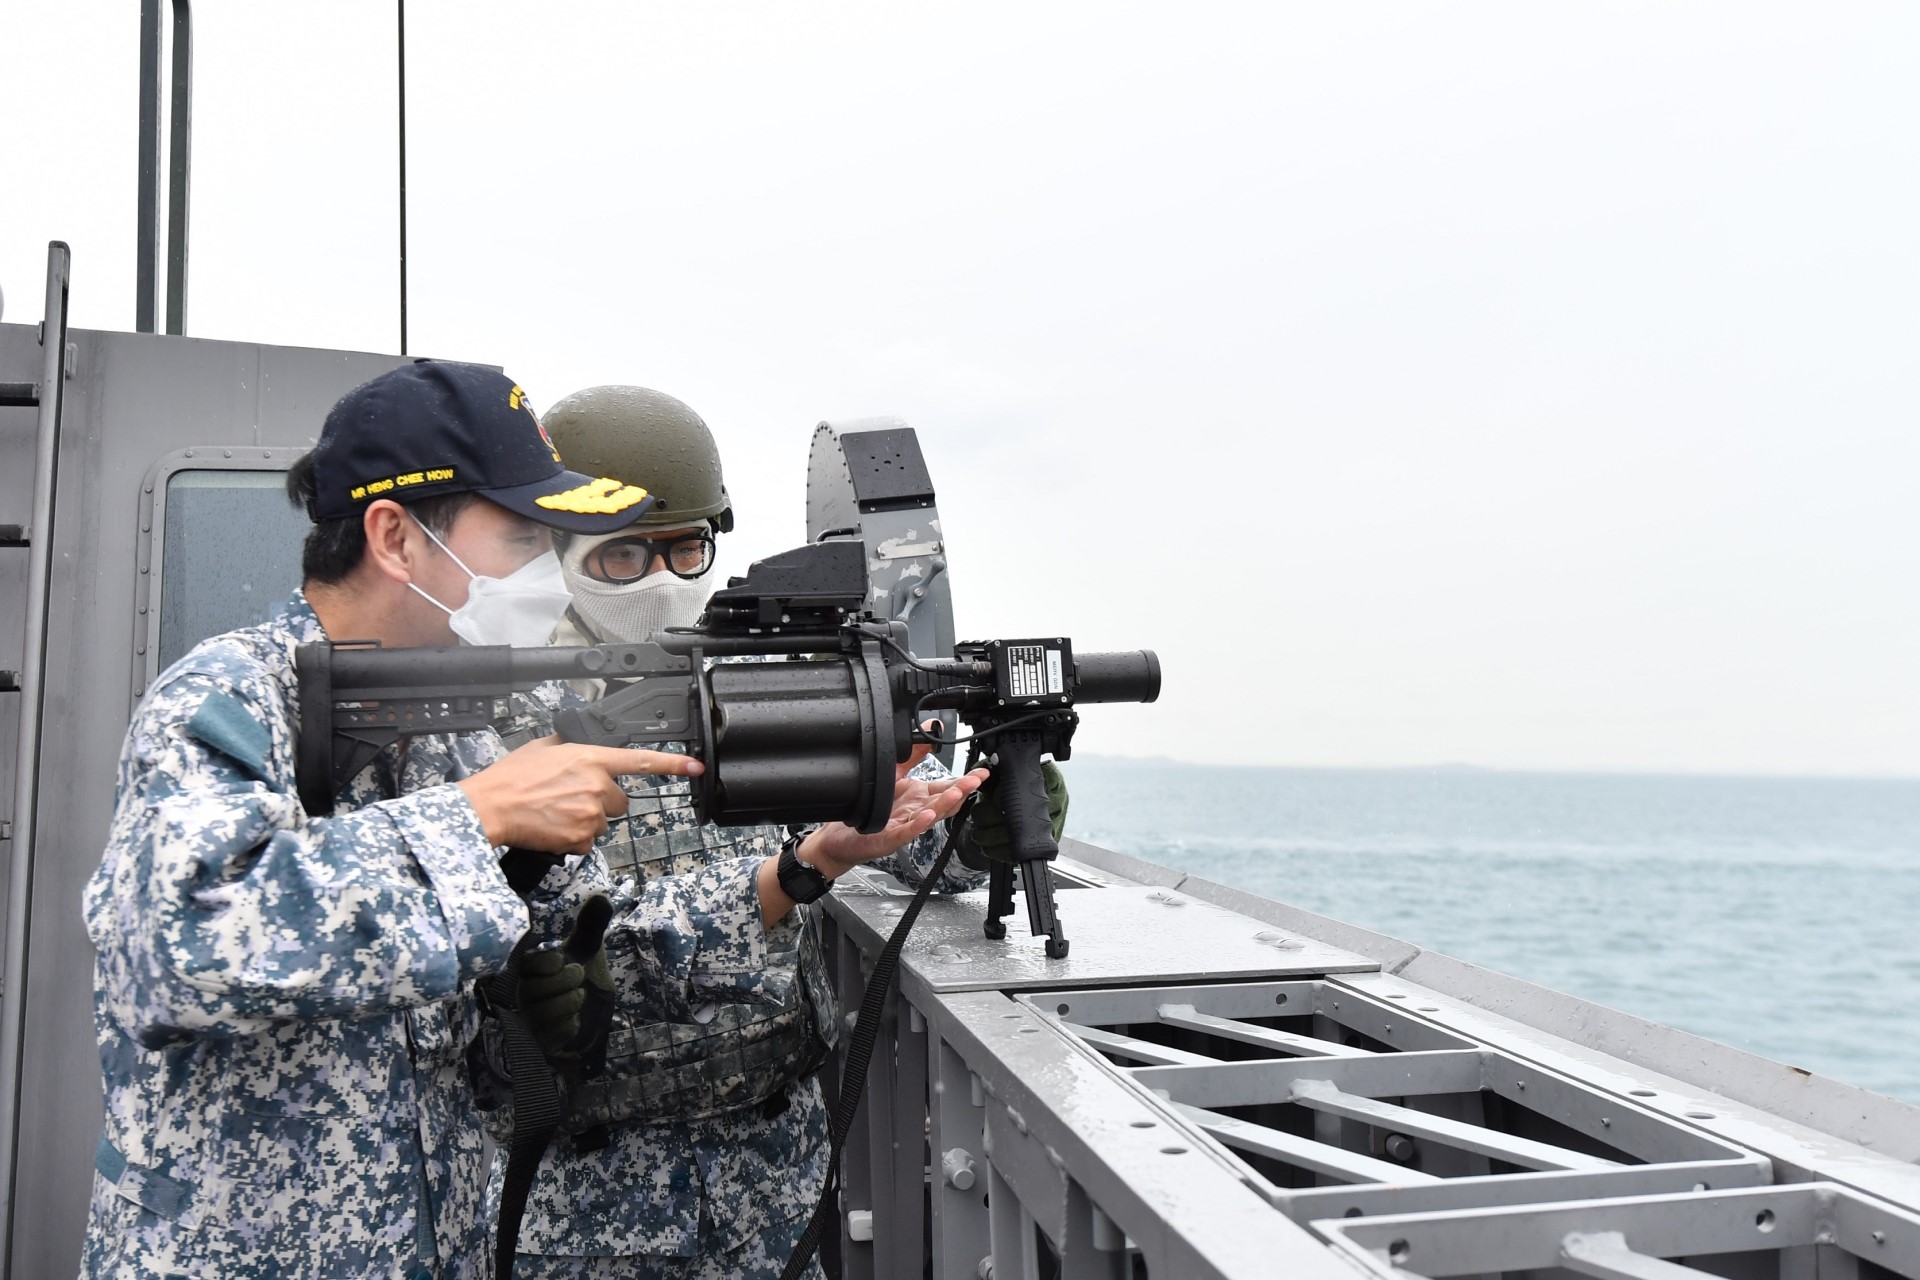 Senior Minister of State for Defence Mr Heng Chee How handling the Extended Range Grenade Launcher, a new Maritime Security and Response Vessel (MSRV) capability, on board MSRV Guardian.